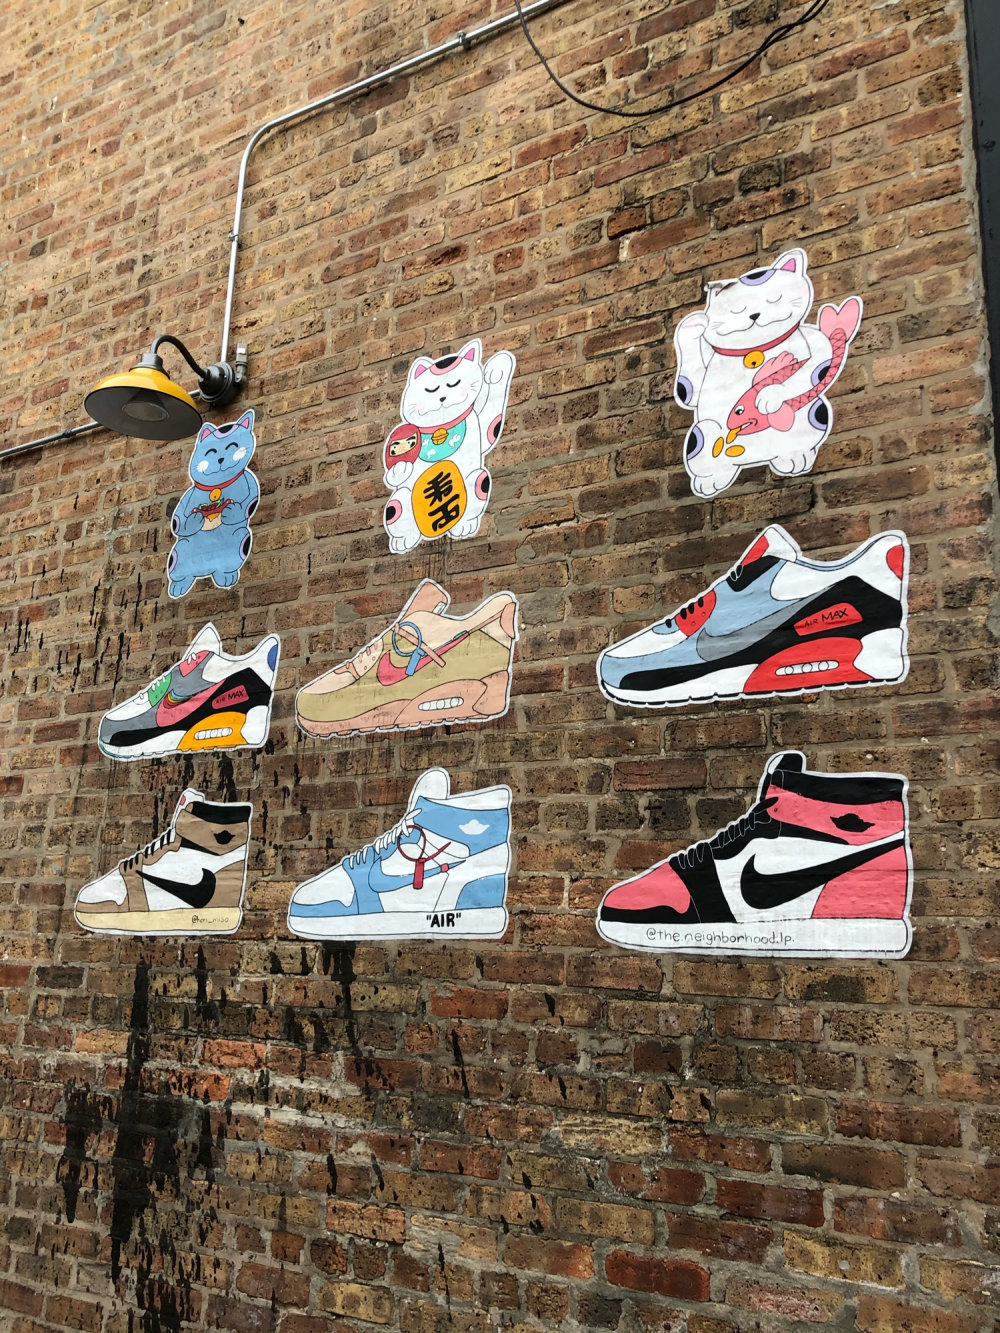 mural in Chicago by artist Hori Miso.